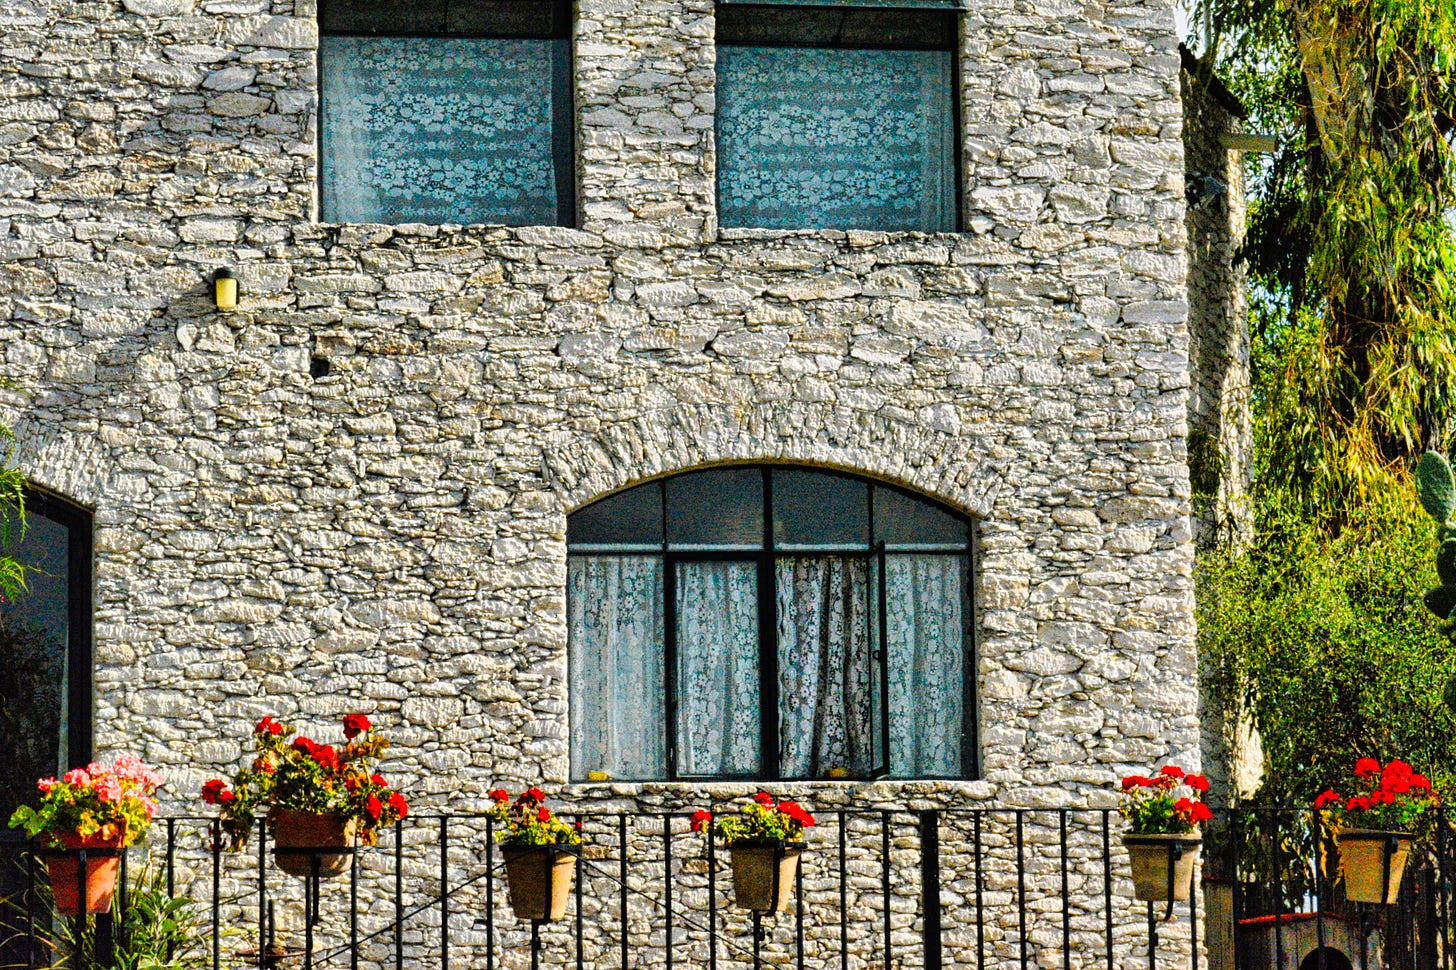 a stone house with two windows on the second floor and one on the first floor with lace windows and an iron fence in front with pots of red geraniums